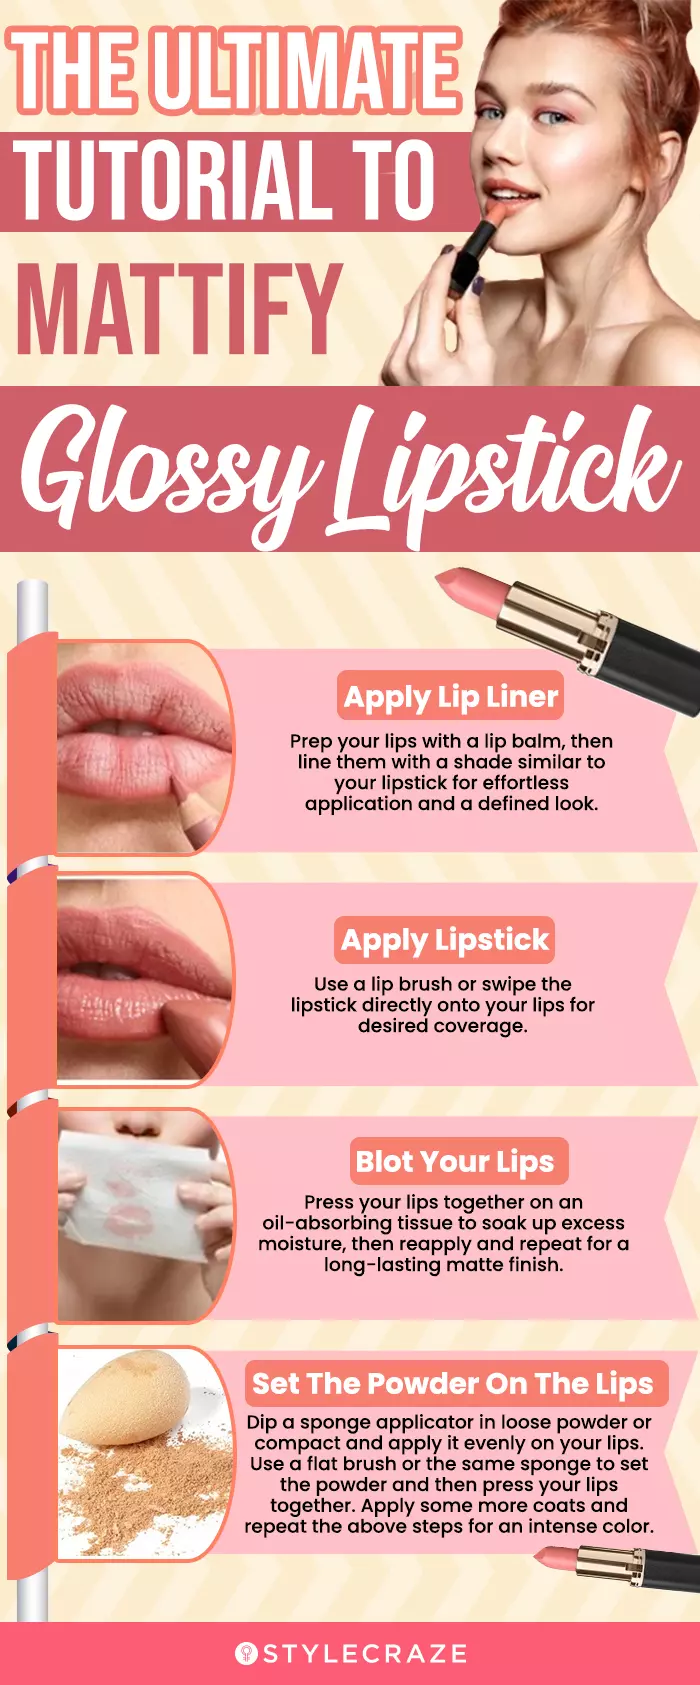 the ultimate tutorial to mattify glossy lipstick (infographic)